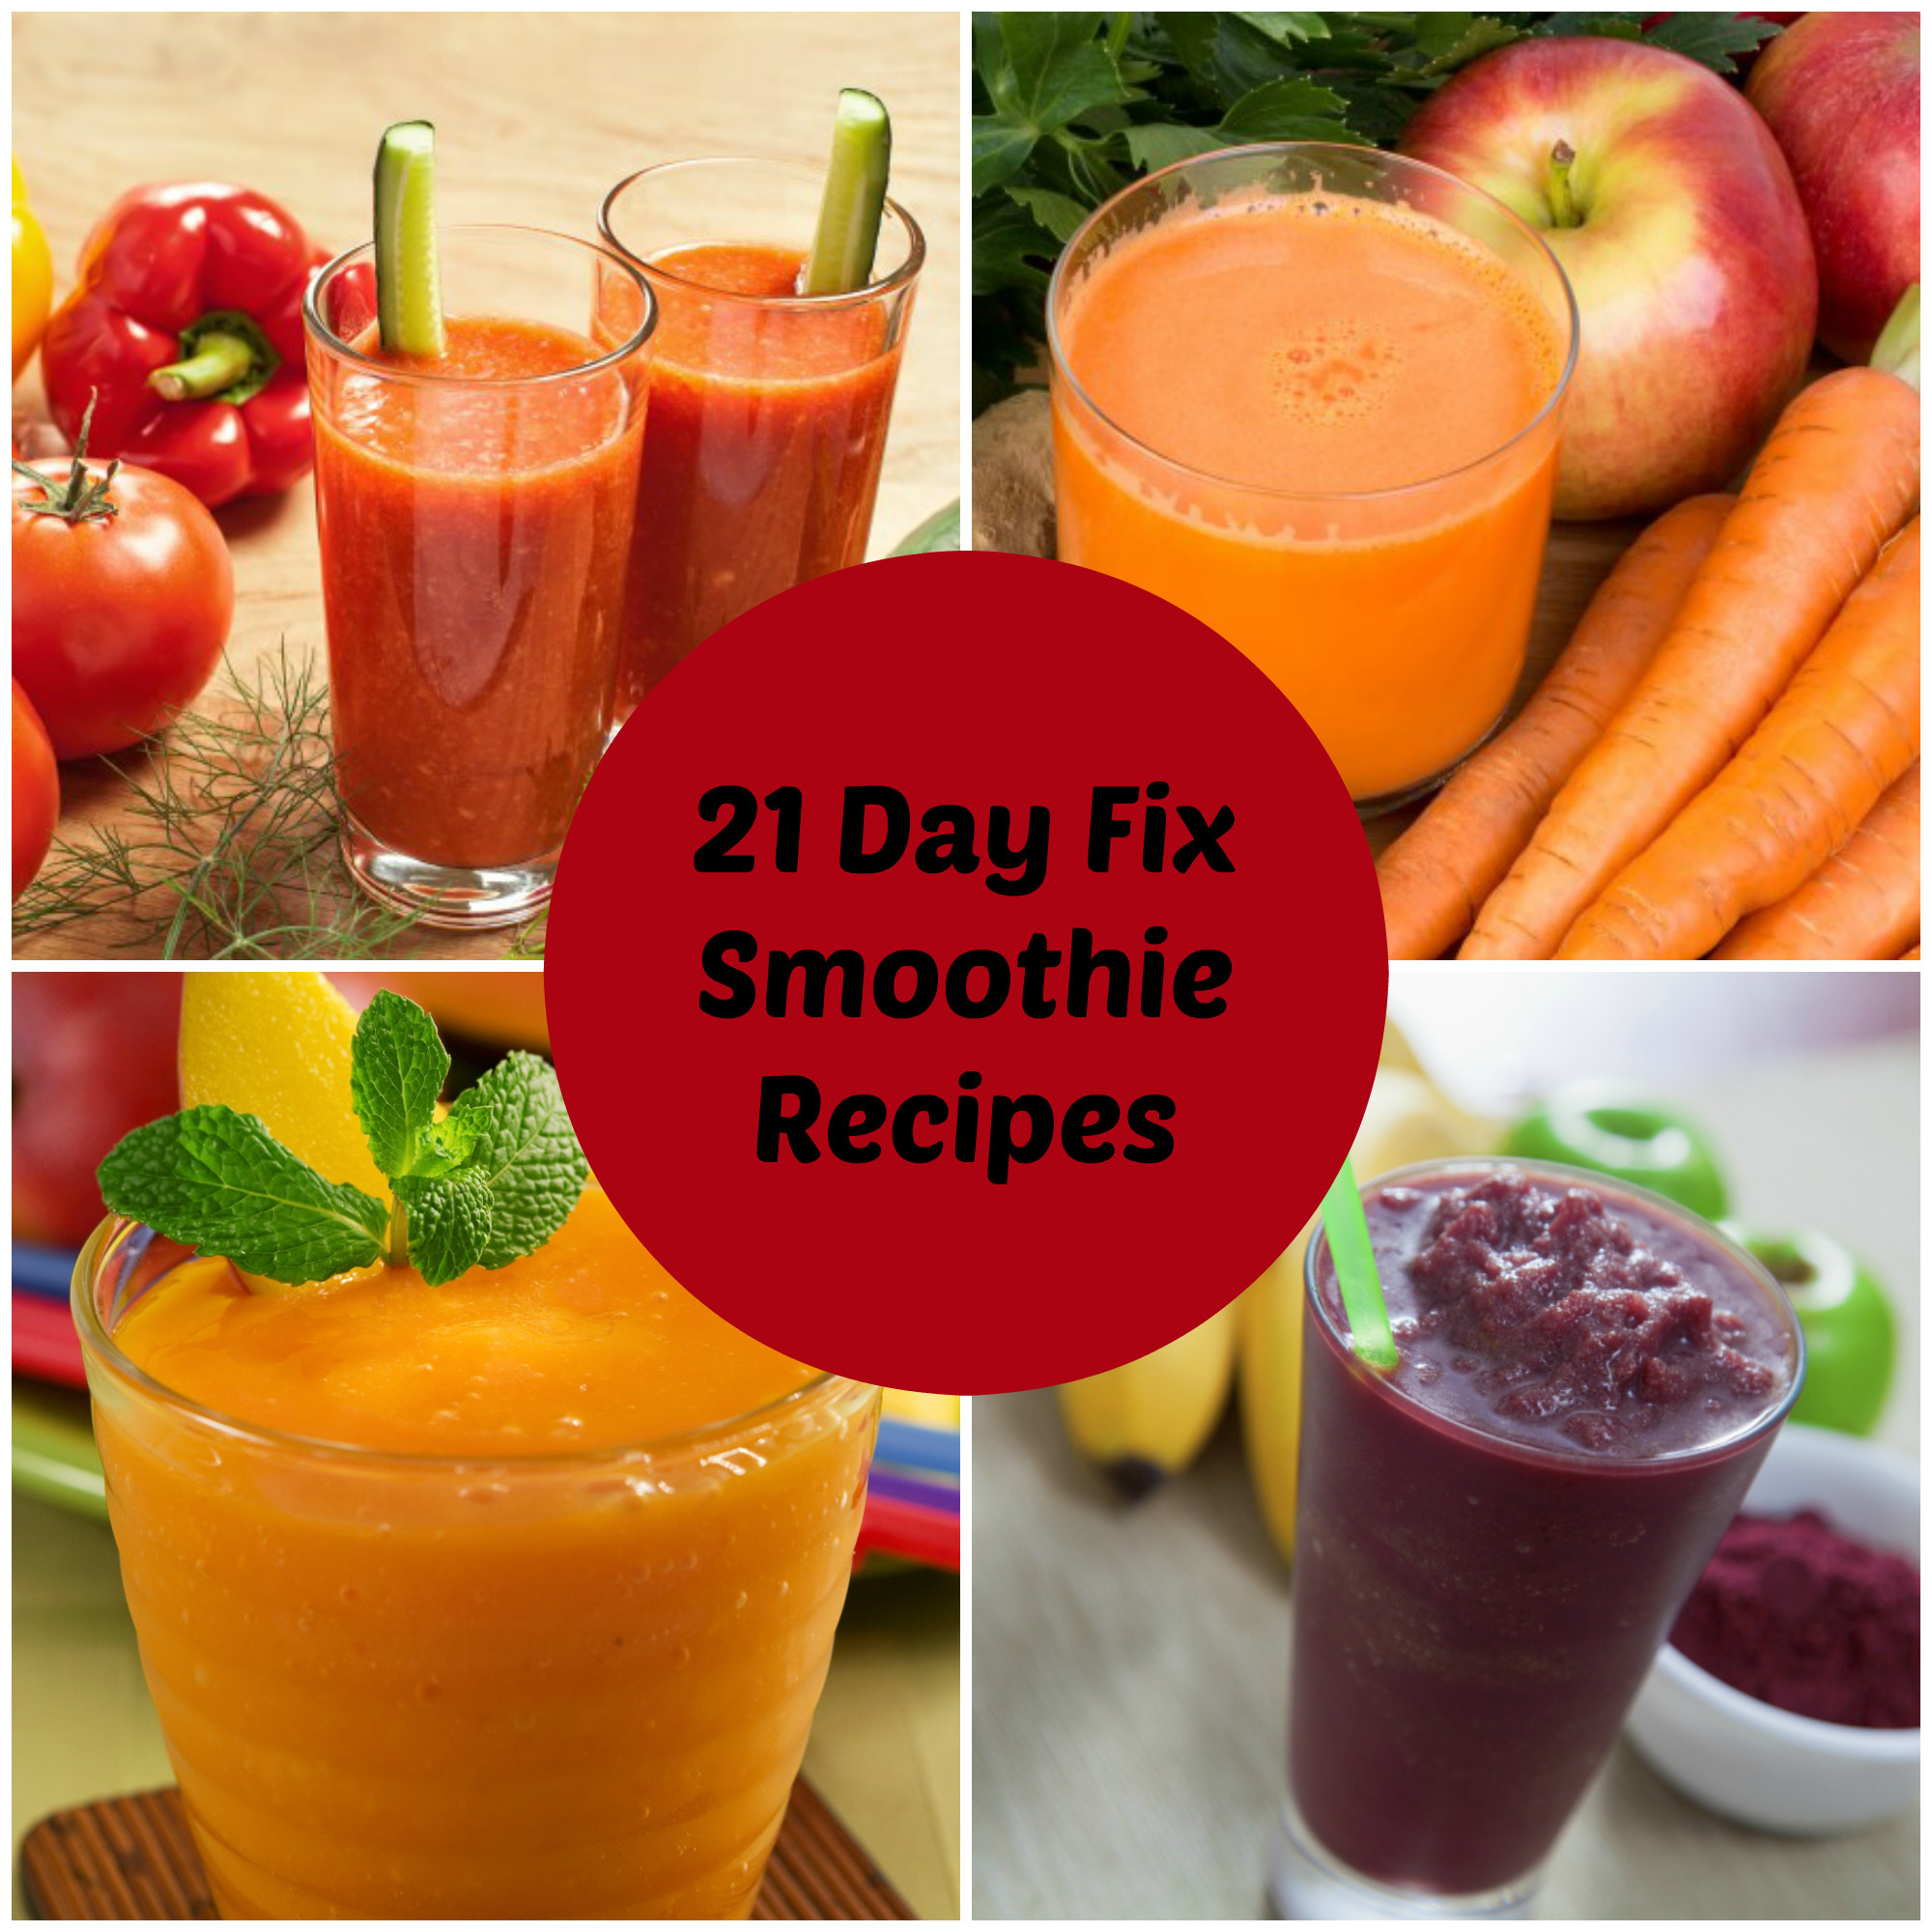 Diet Smoothie Recipes
 How to Make Smoothies for the 21 Day Fix All Nutribullet